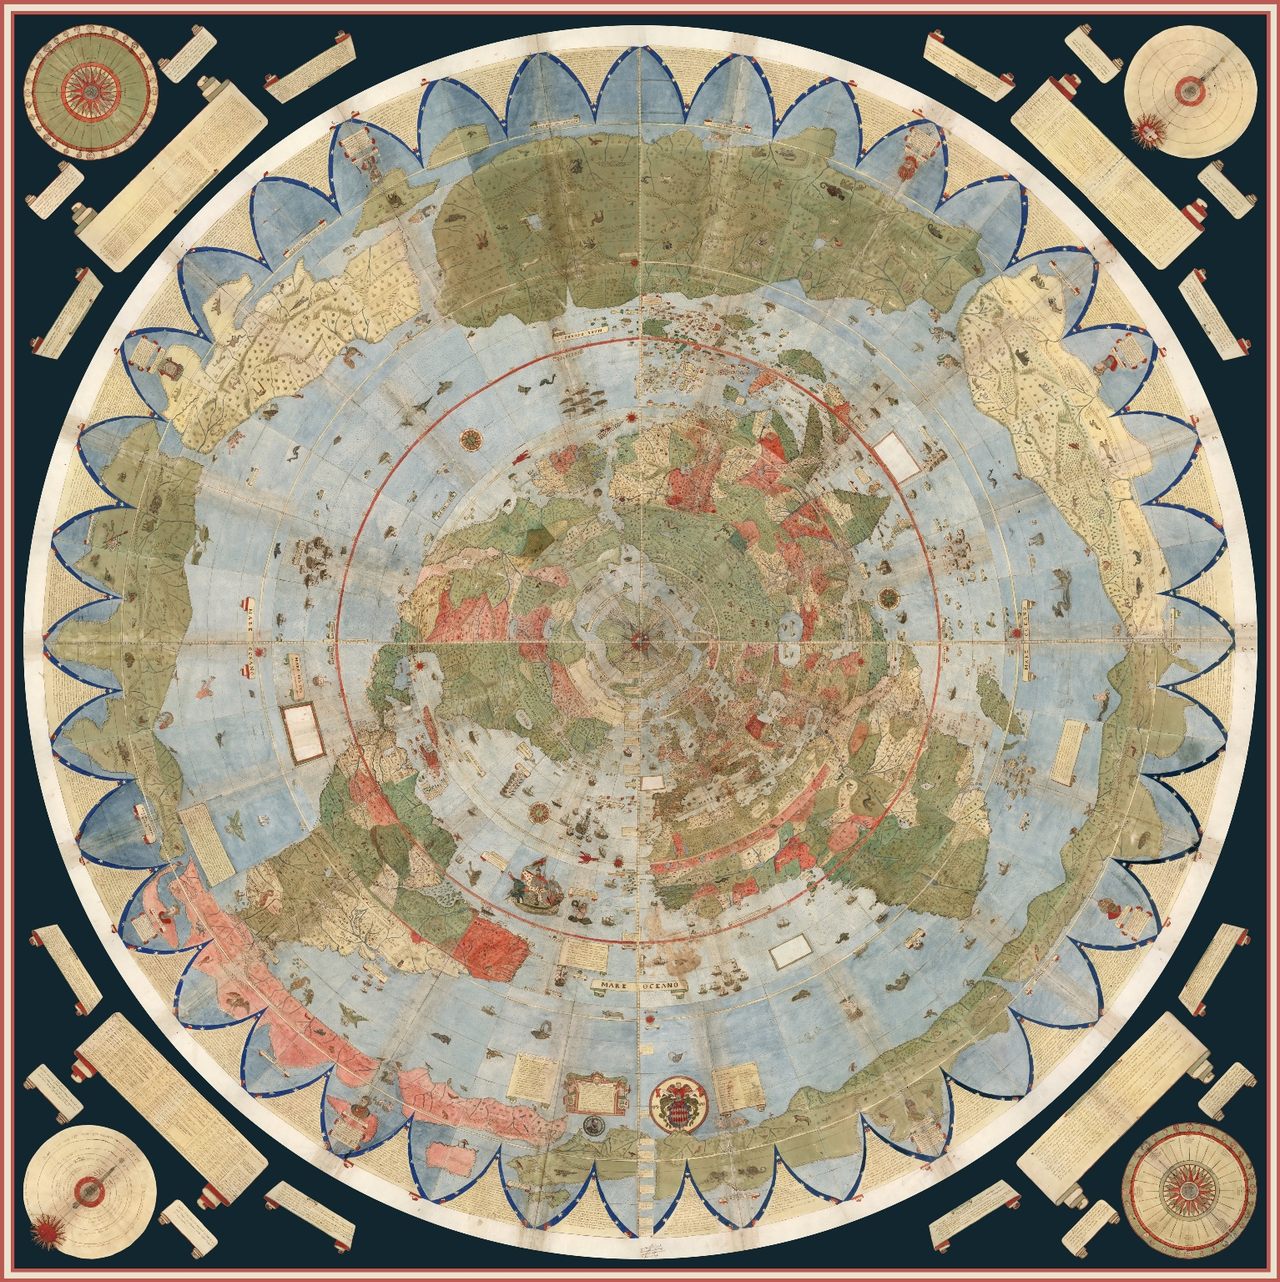 The projection, more than nine feet in diameter, is made up of 60 smaller maps, with the North Pole at the center.